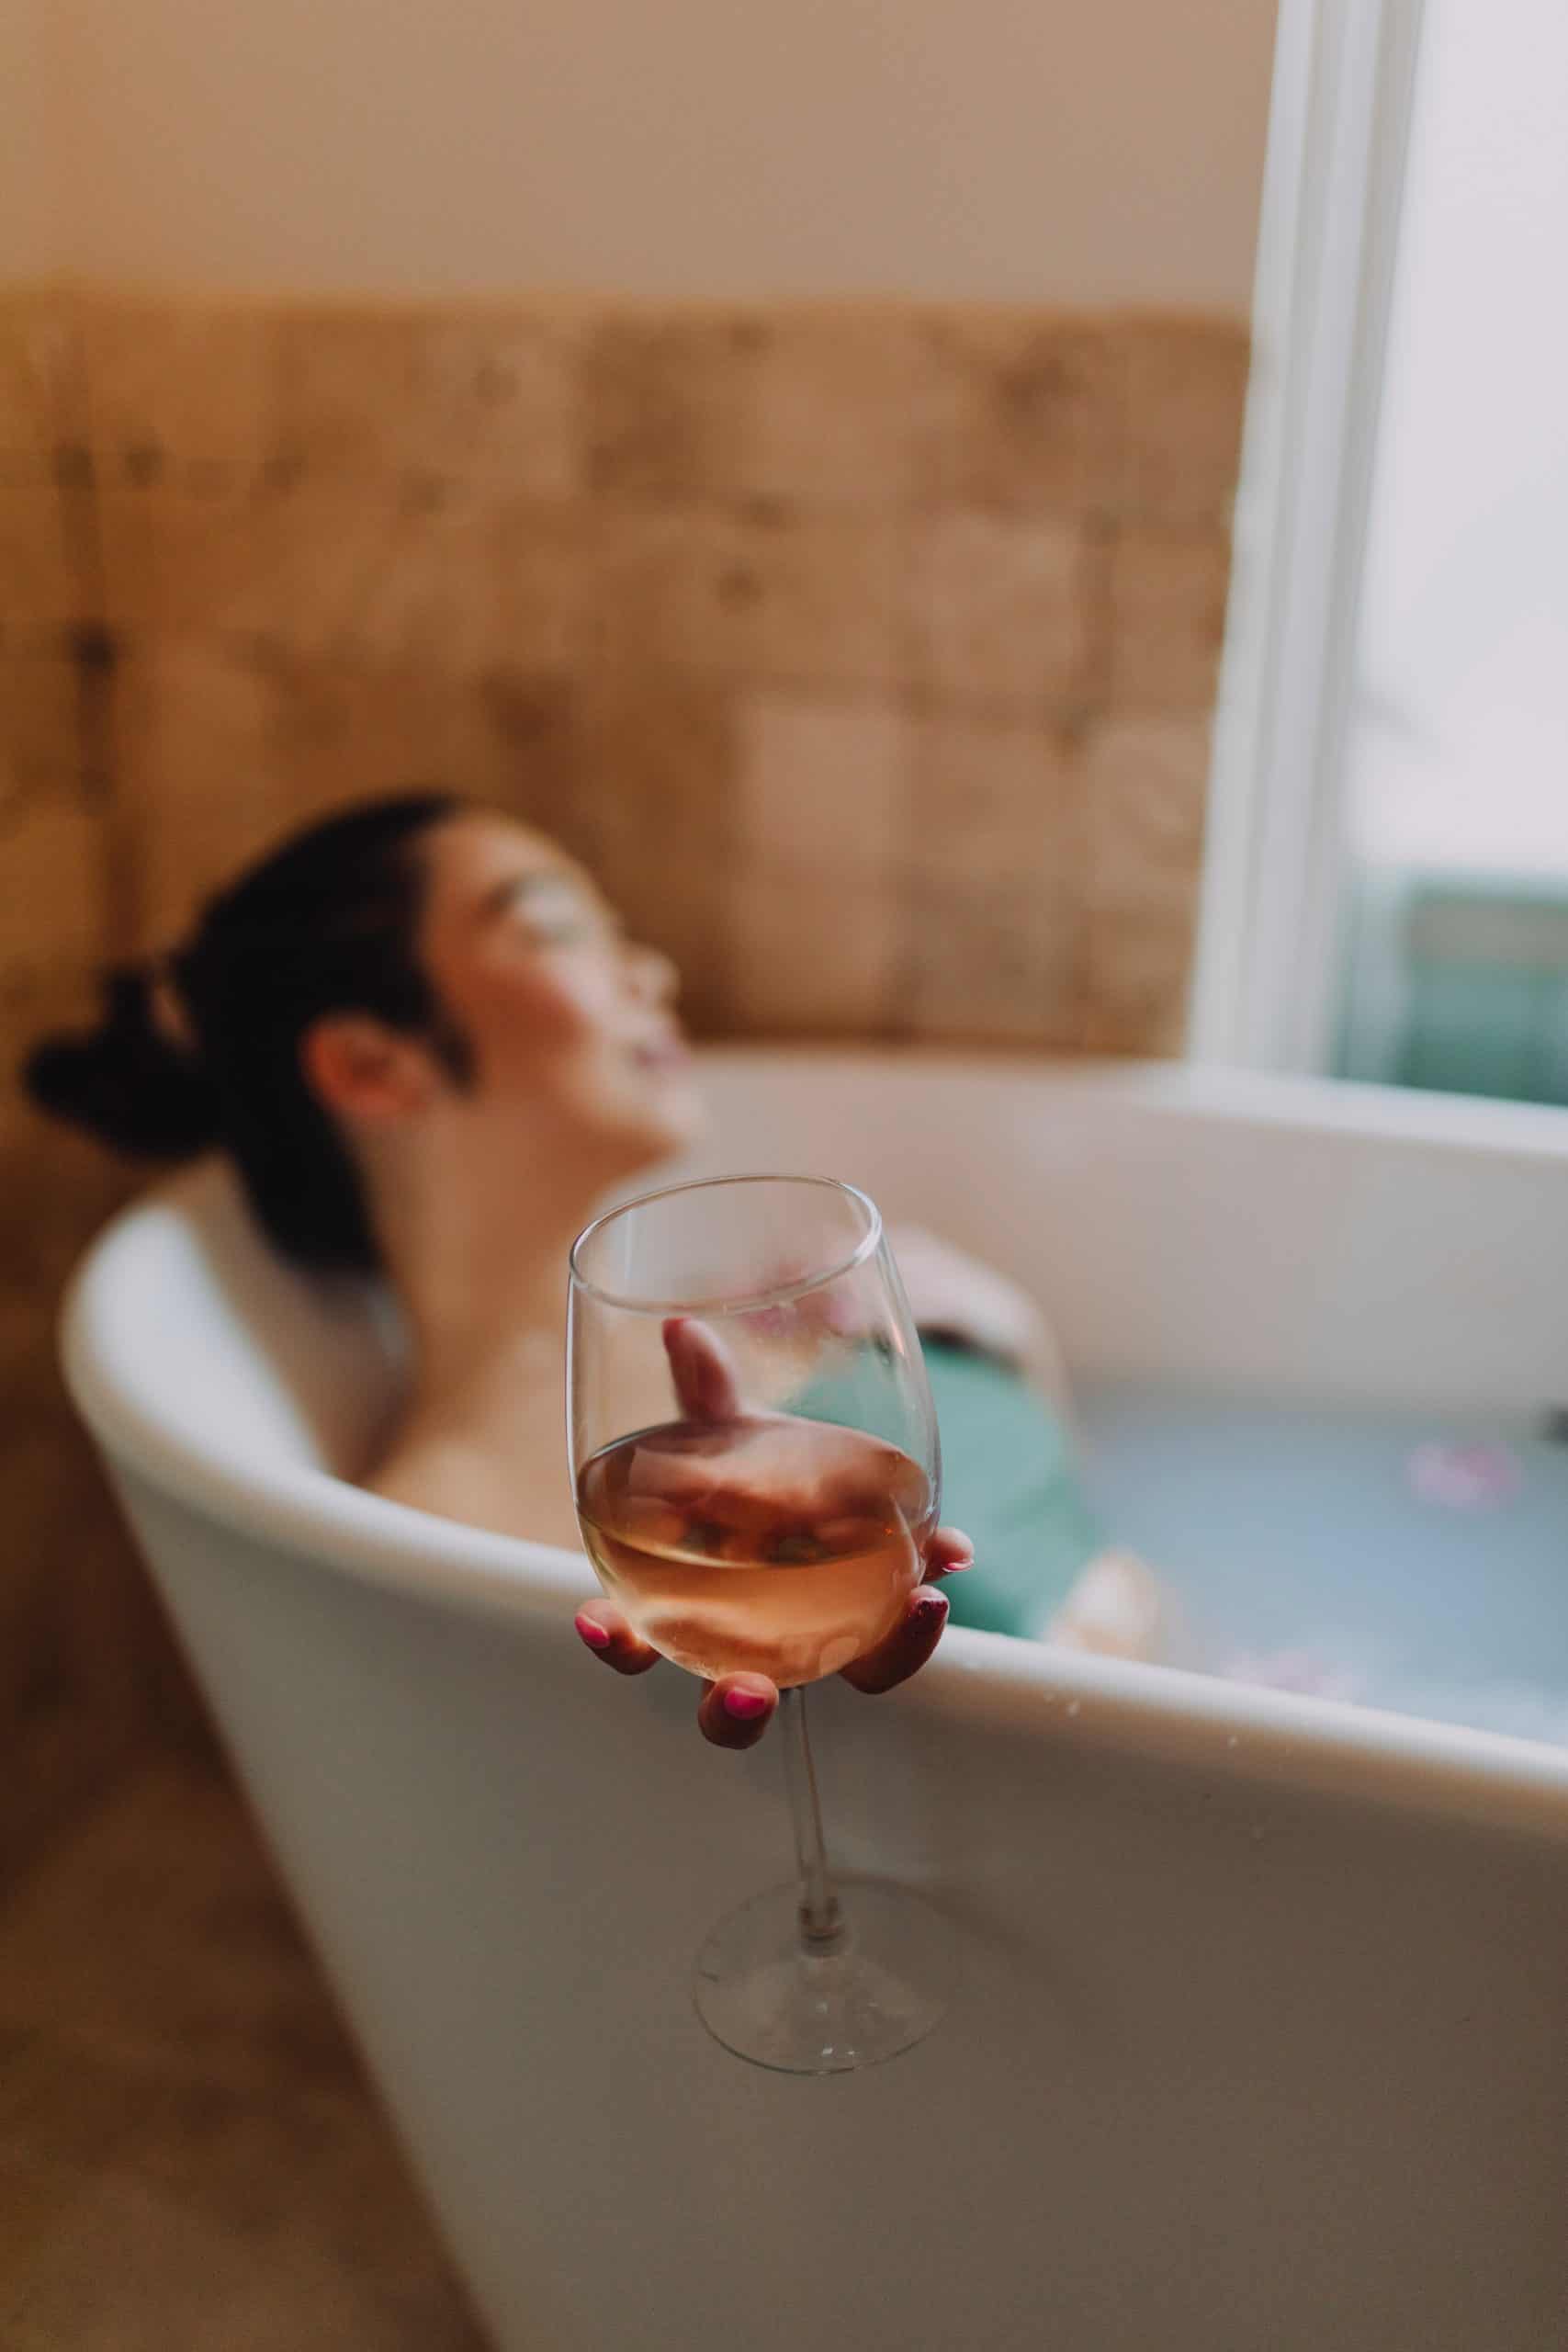 Woman in White Bathtub Holding Clear Drinking Glass of Wine